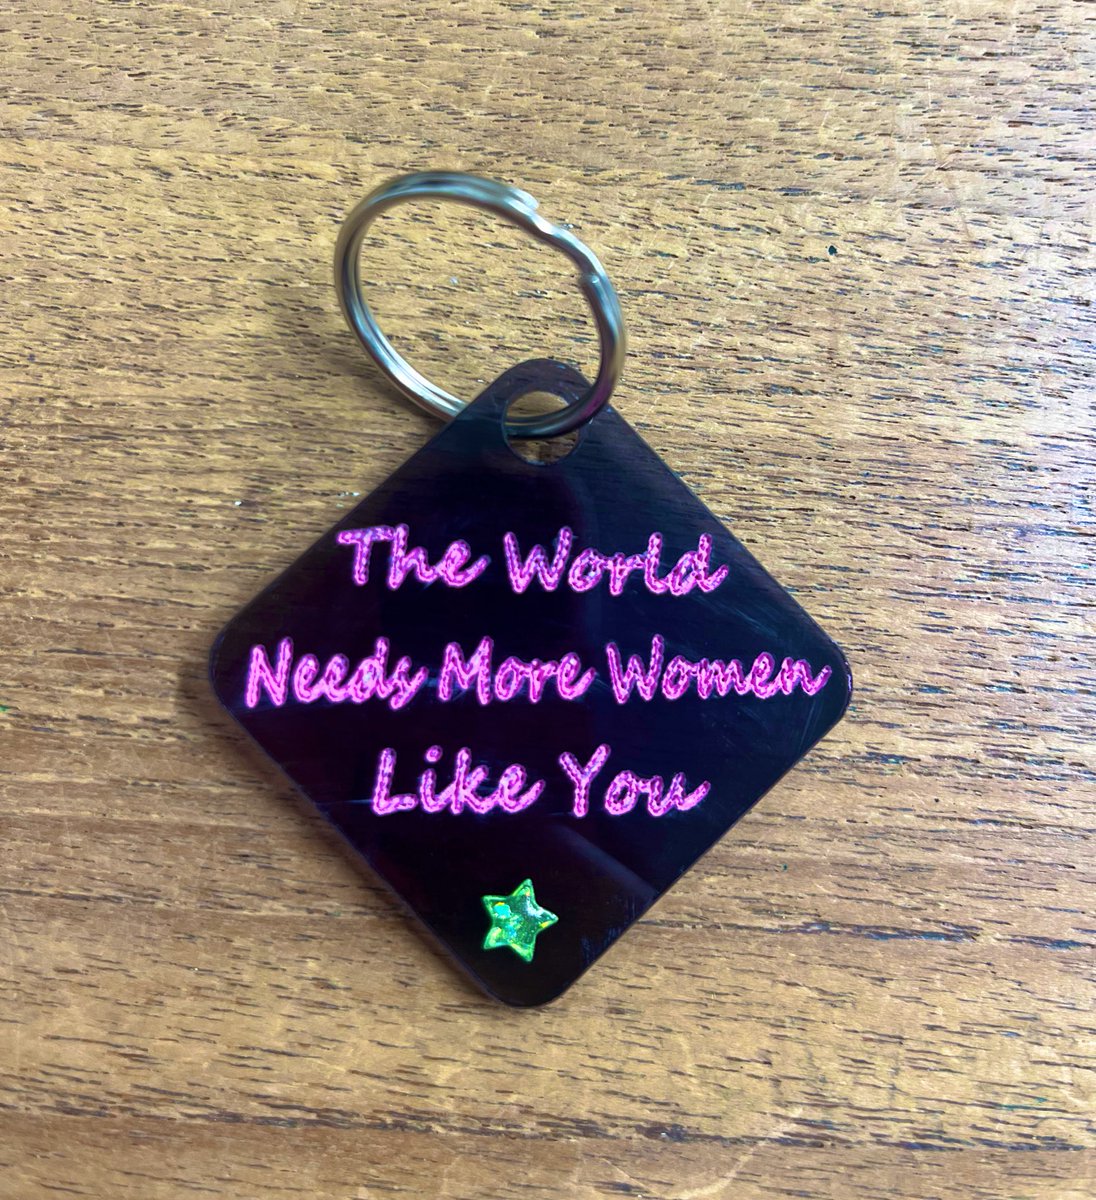 The cutest gift on my desk this morning🩷 #womenempoweringwomen #galentines